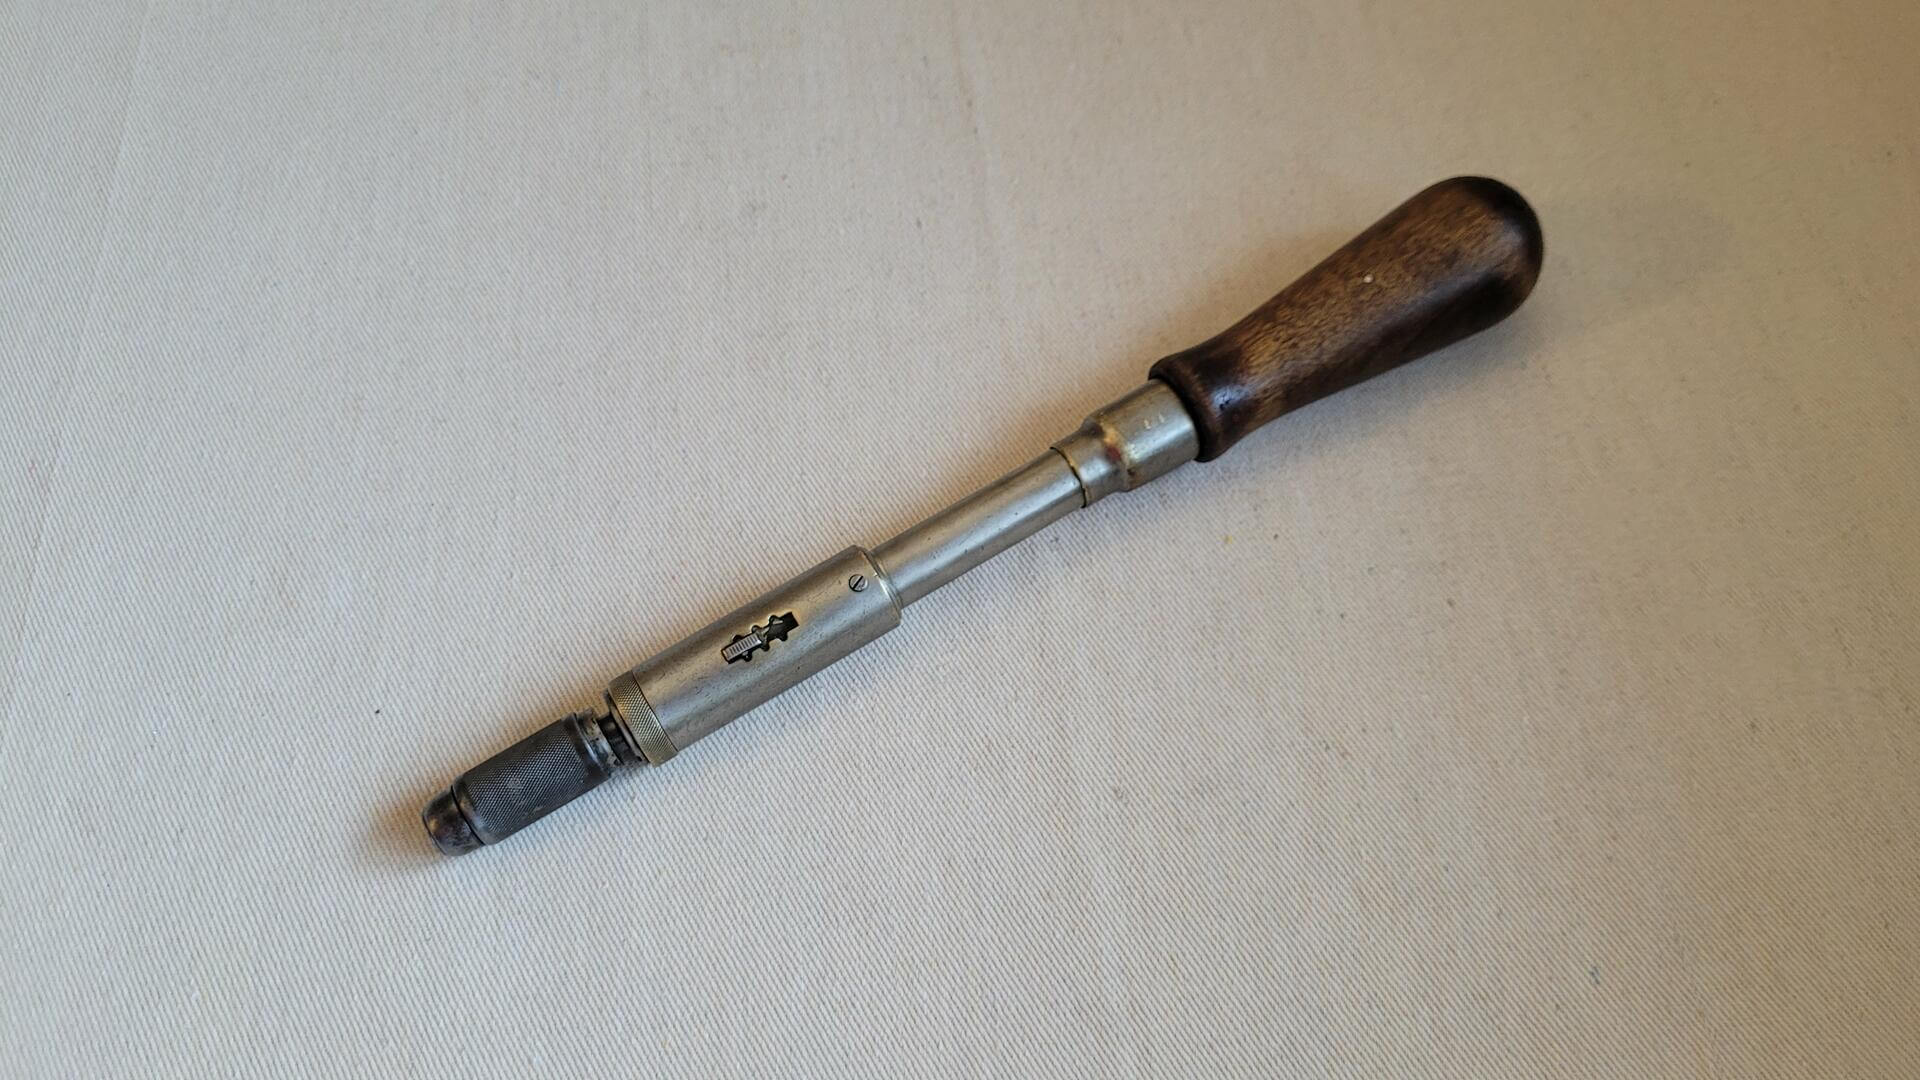 Vintage Yankee No 30 push drill screwdriver by North Brothers Manufacturing Company from Philadelphia PA